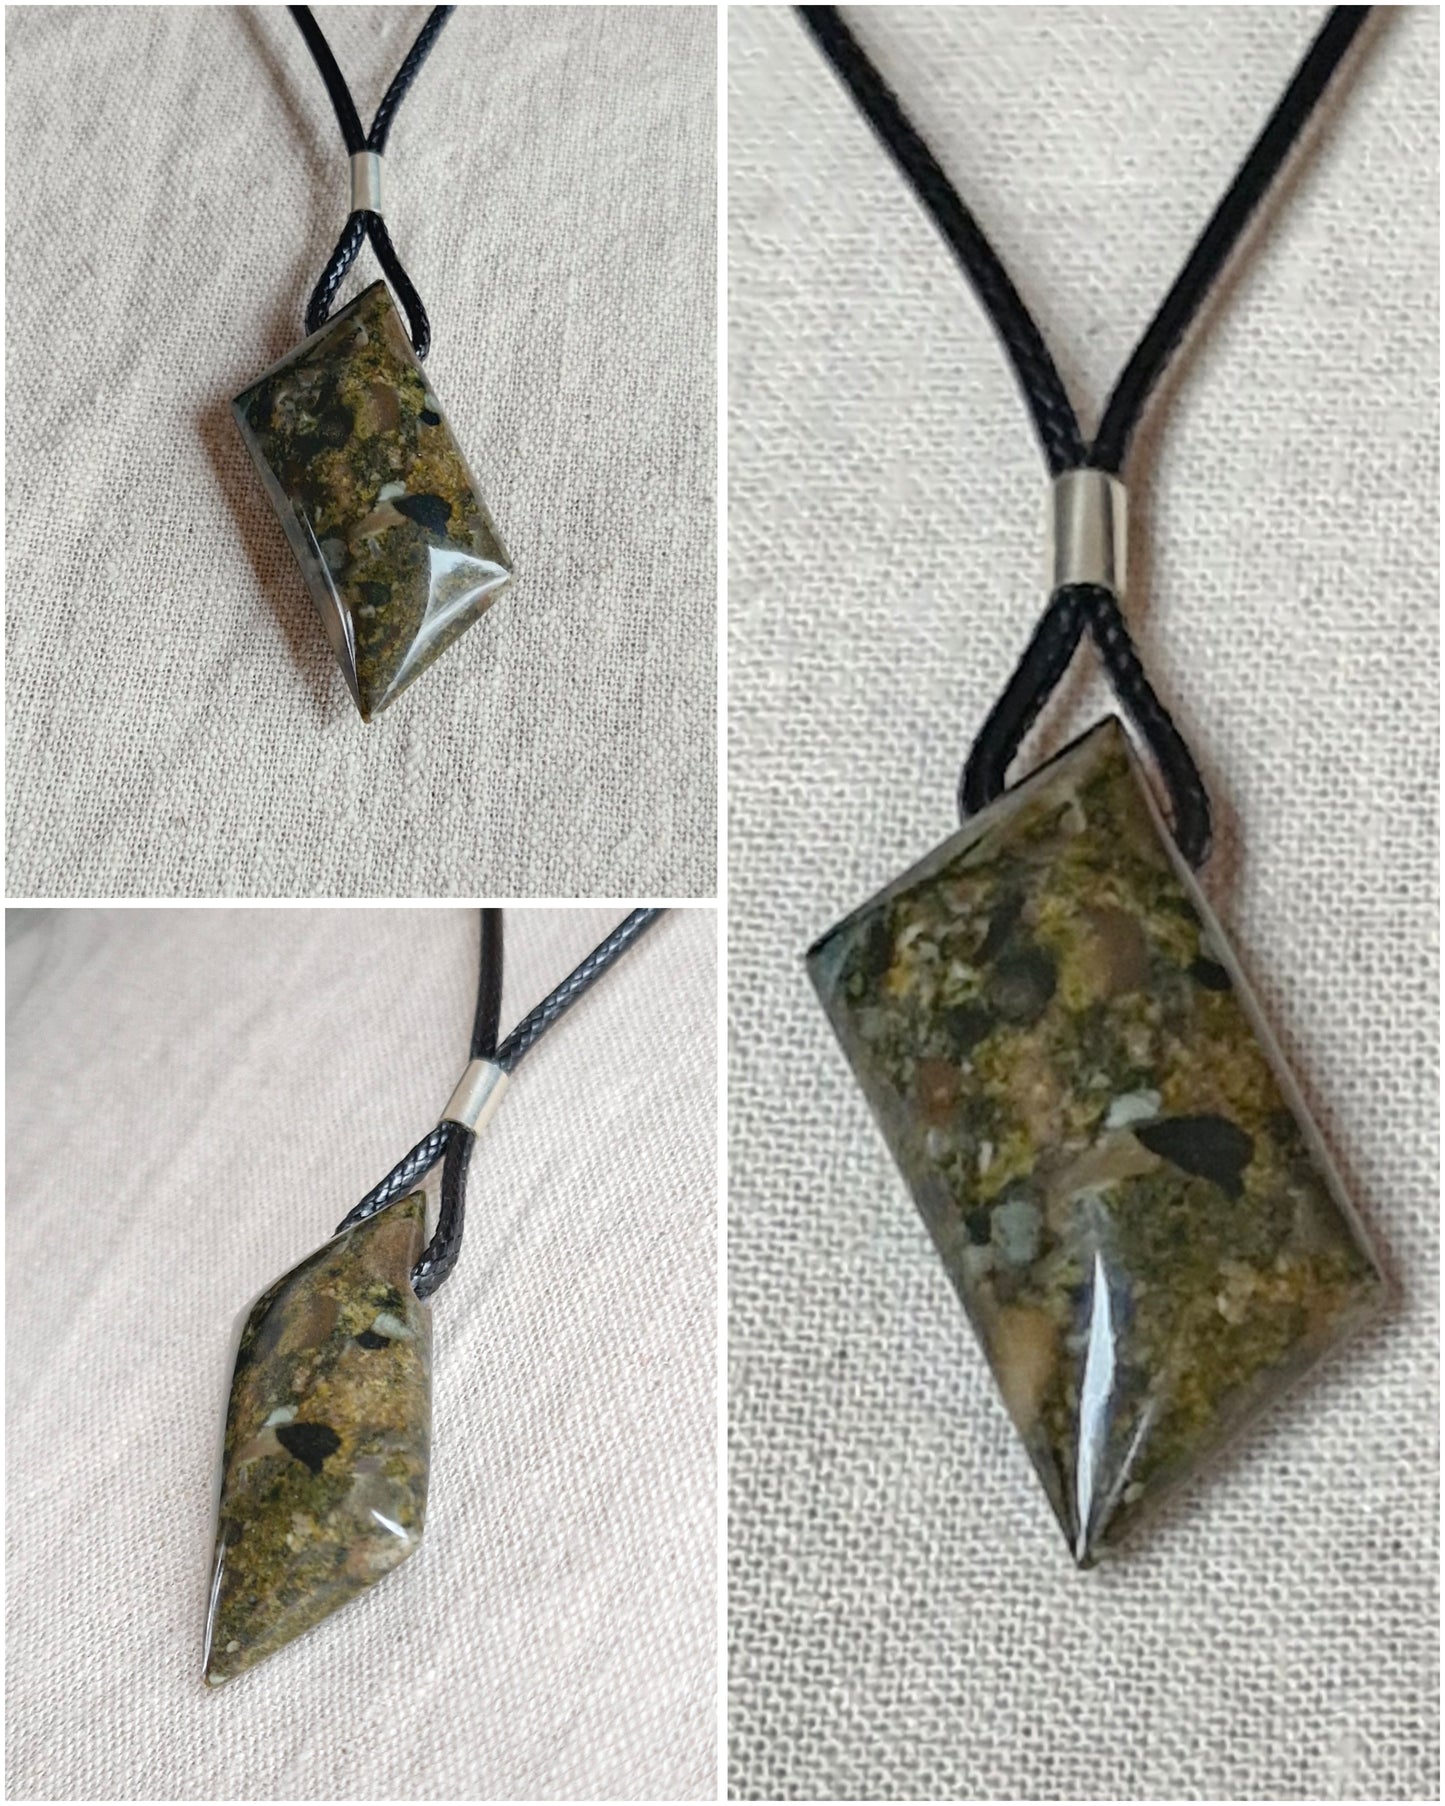 Pendant - conglomerate (conglomerate)